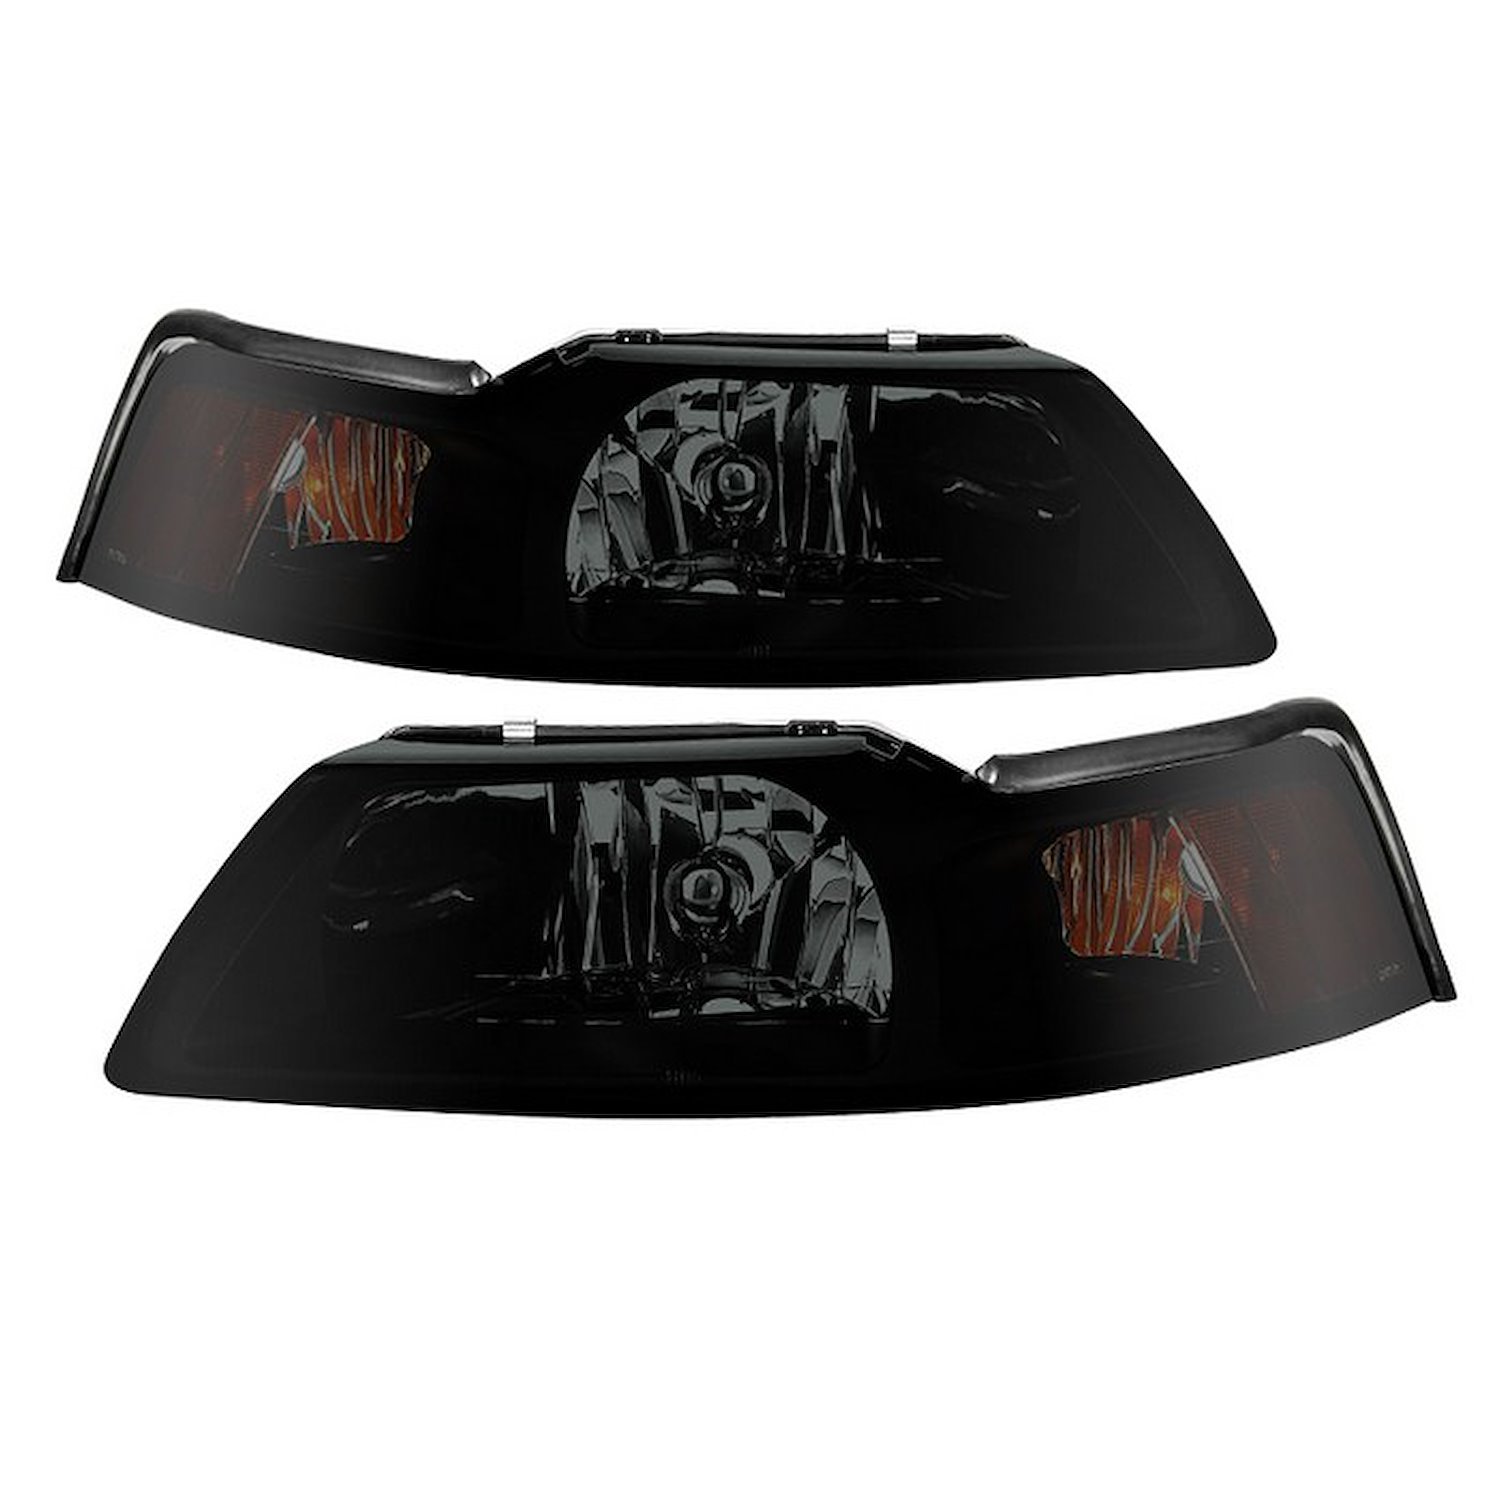 xTune Crystal Headlights 1999-2004 Ford Mustang